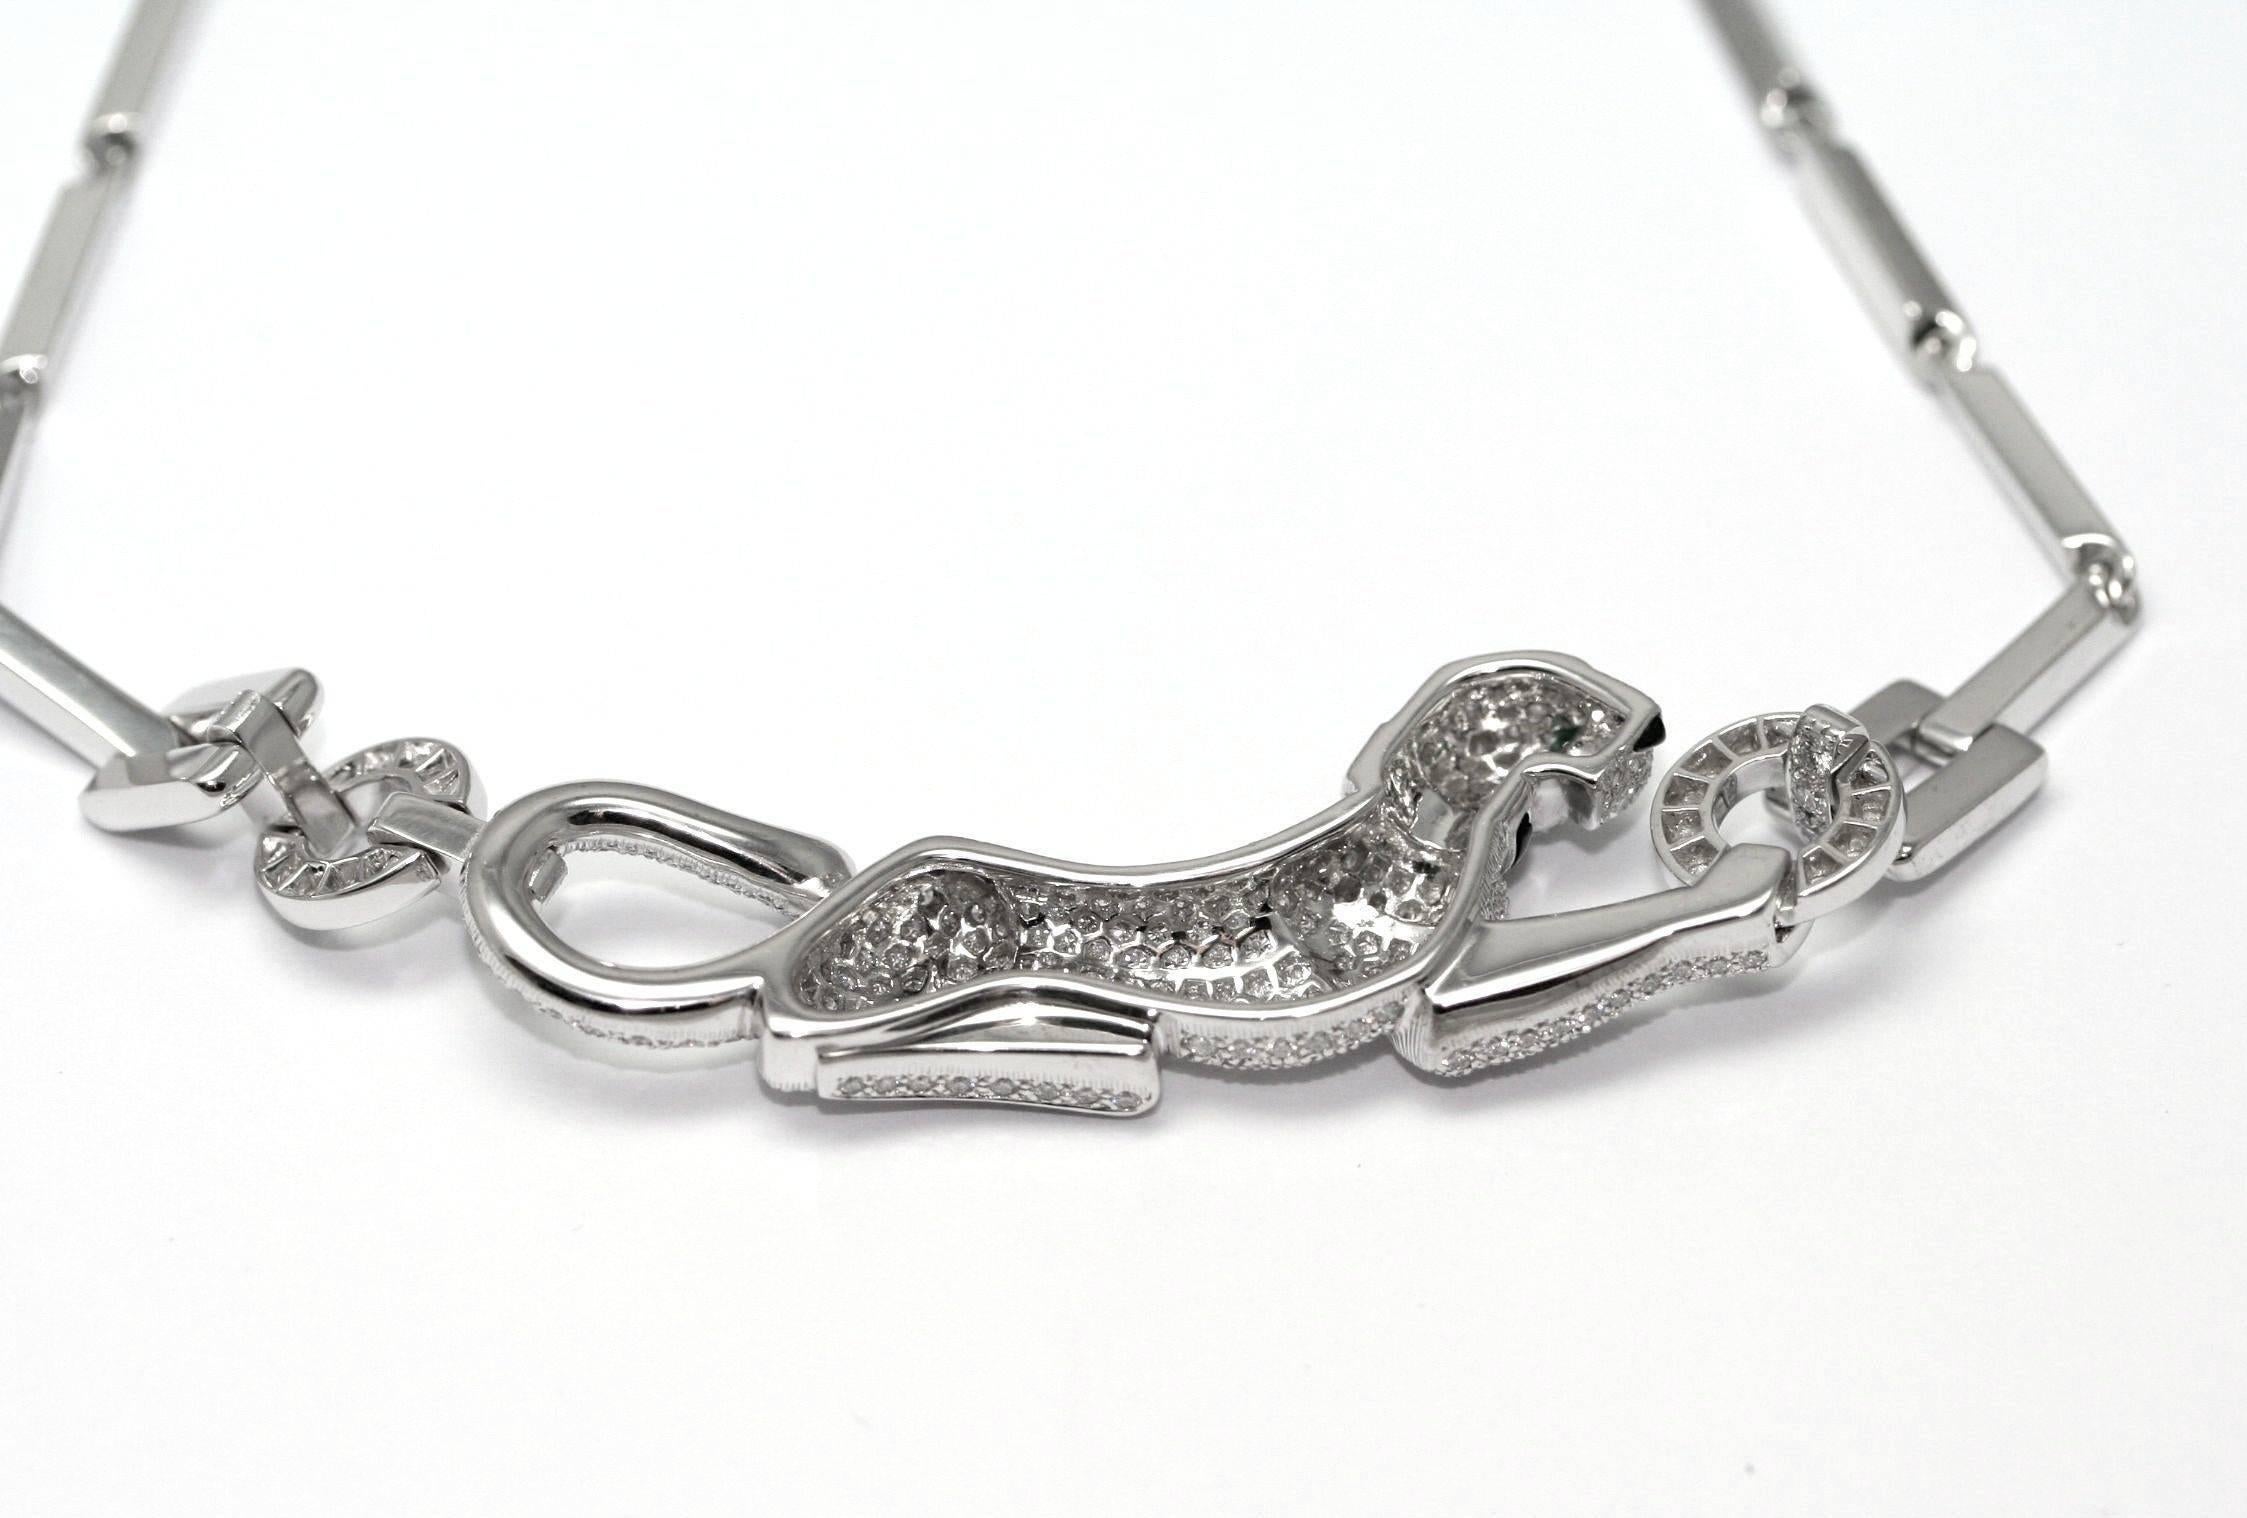 CARTIER Panther Necklace in white gold and diamonds, signed, numbered 37020A, length 41cm (52.85 grams)

